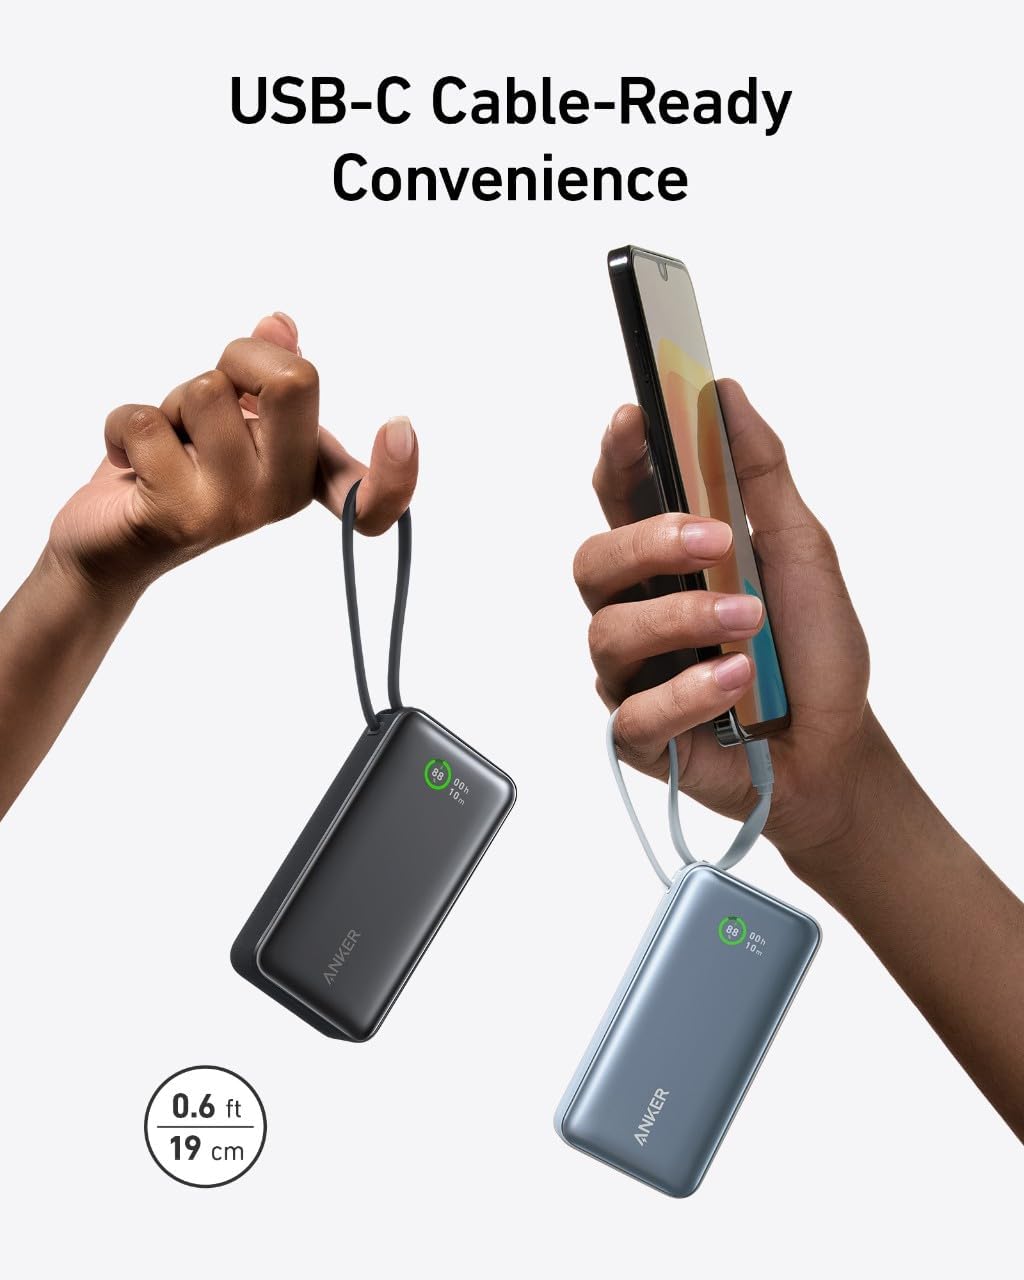 Anker Latest Nano Series of USB-C Chargers Land in IFA